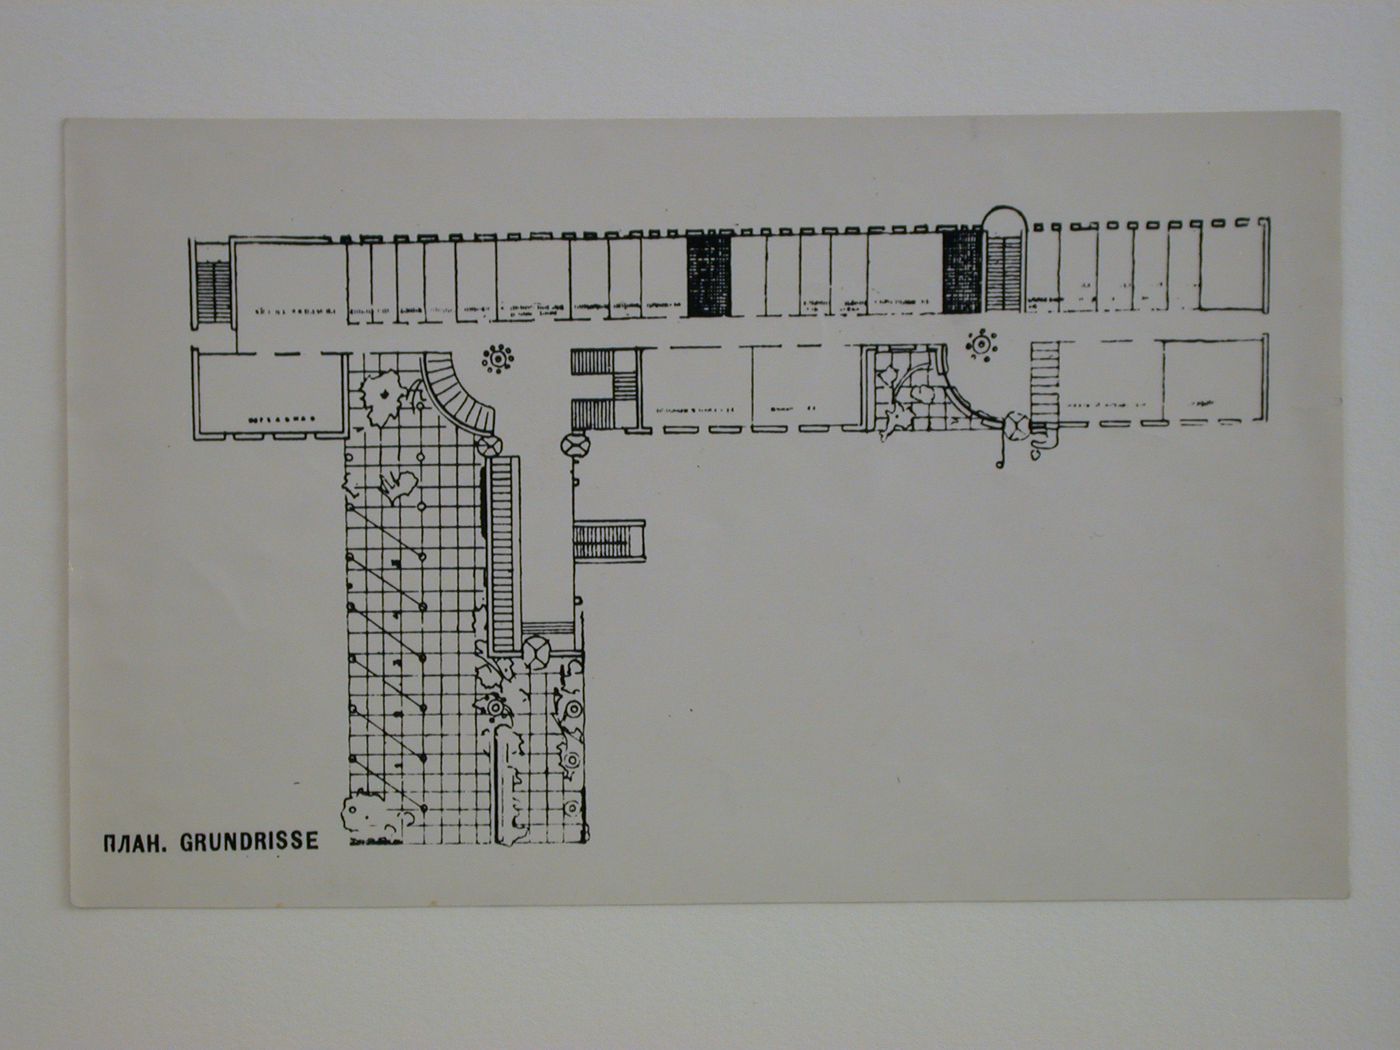 Photograph of a plan for a government office building competition, Alma-Ata, Soviet Union (now in Kazakhstan)